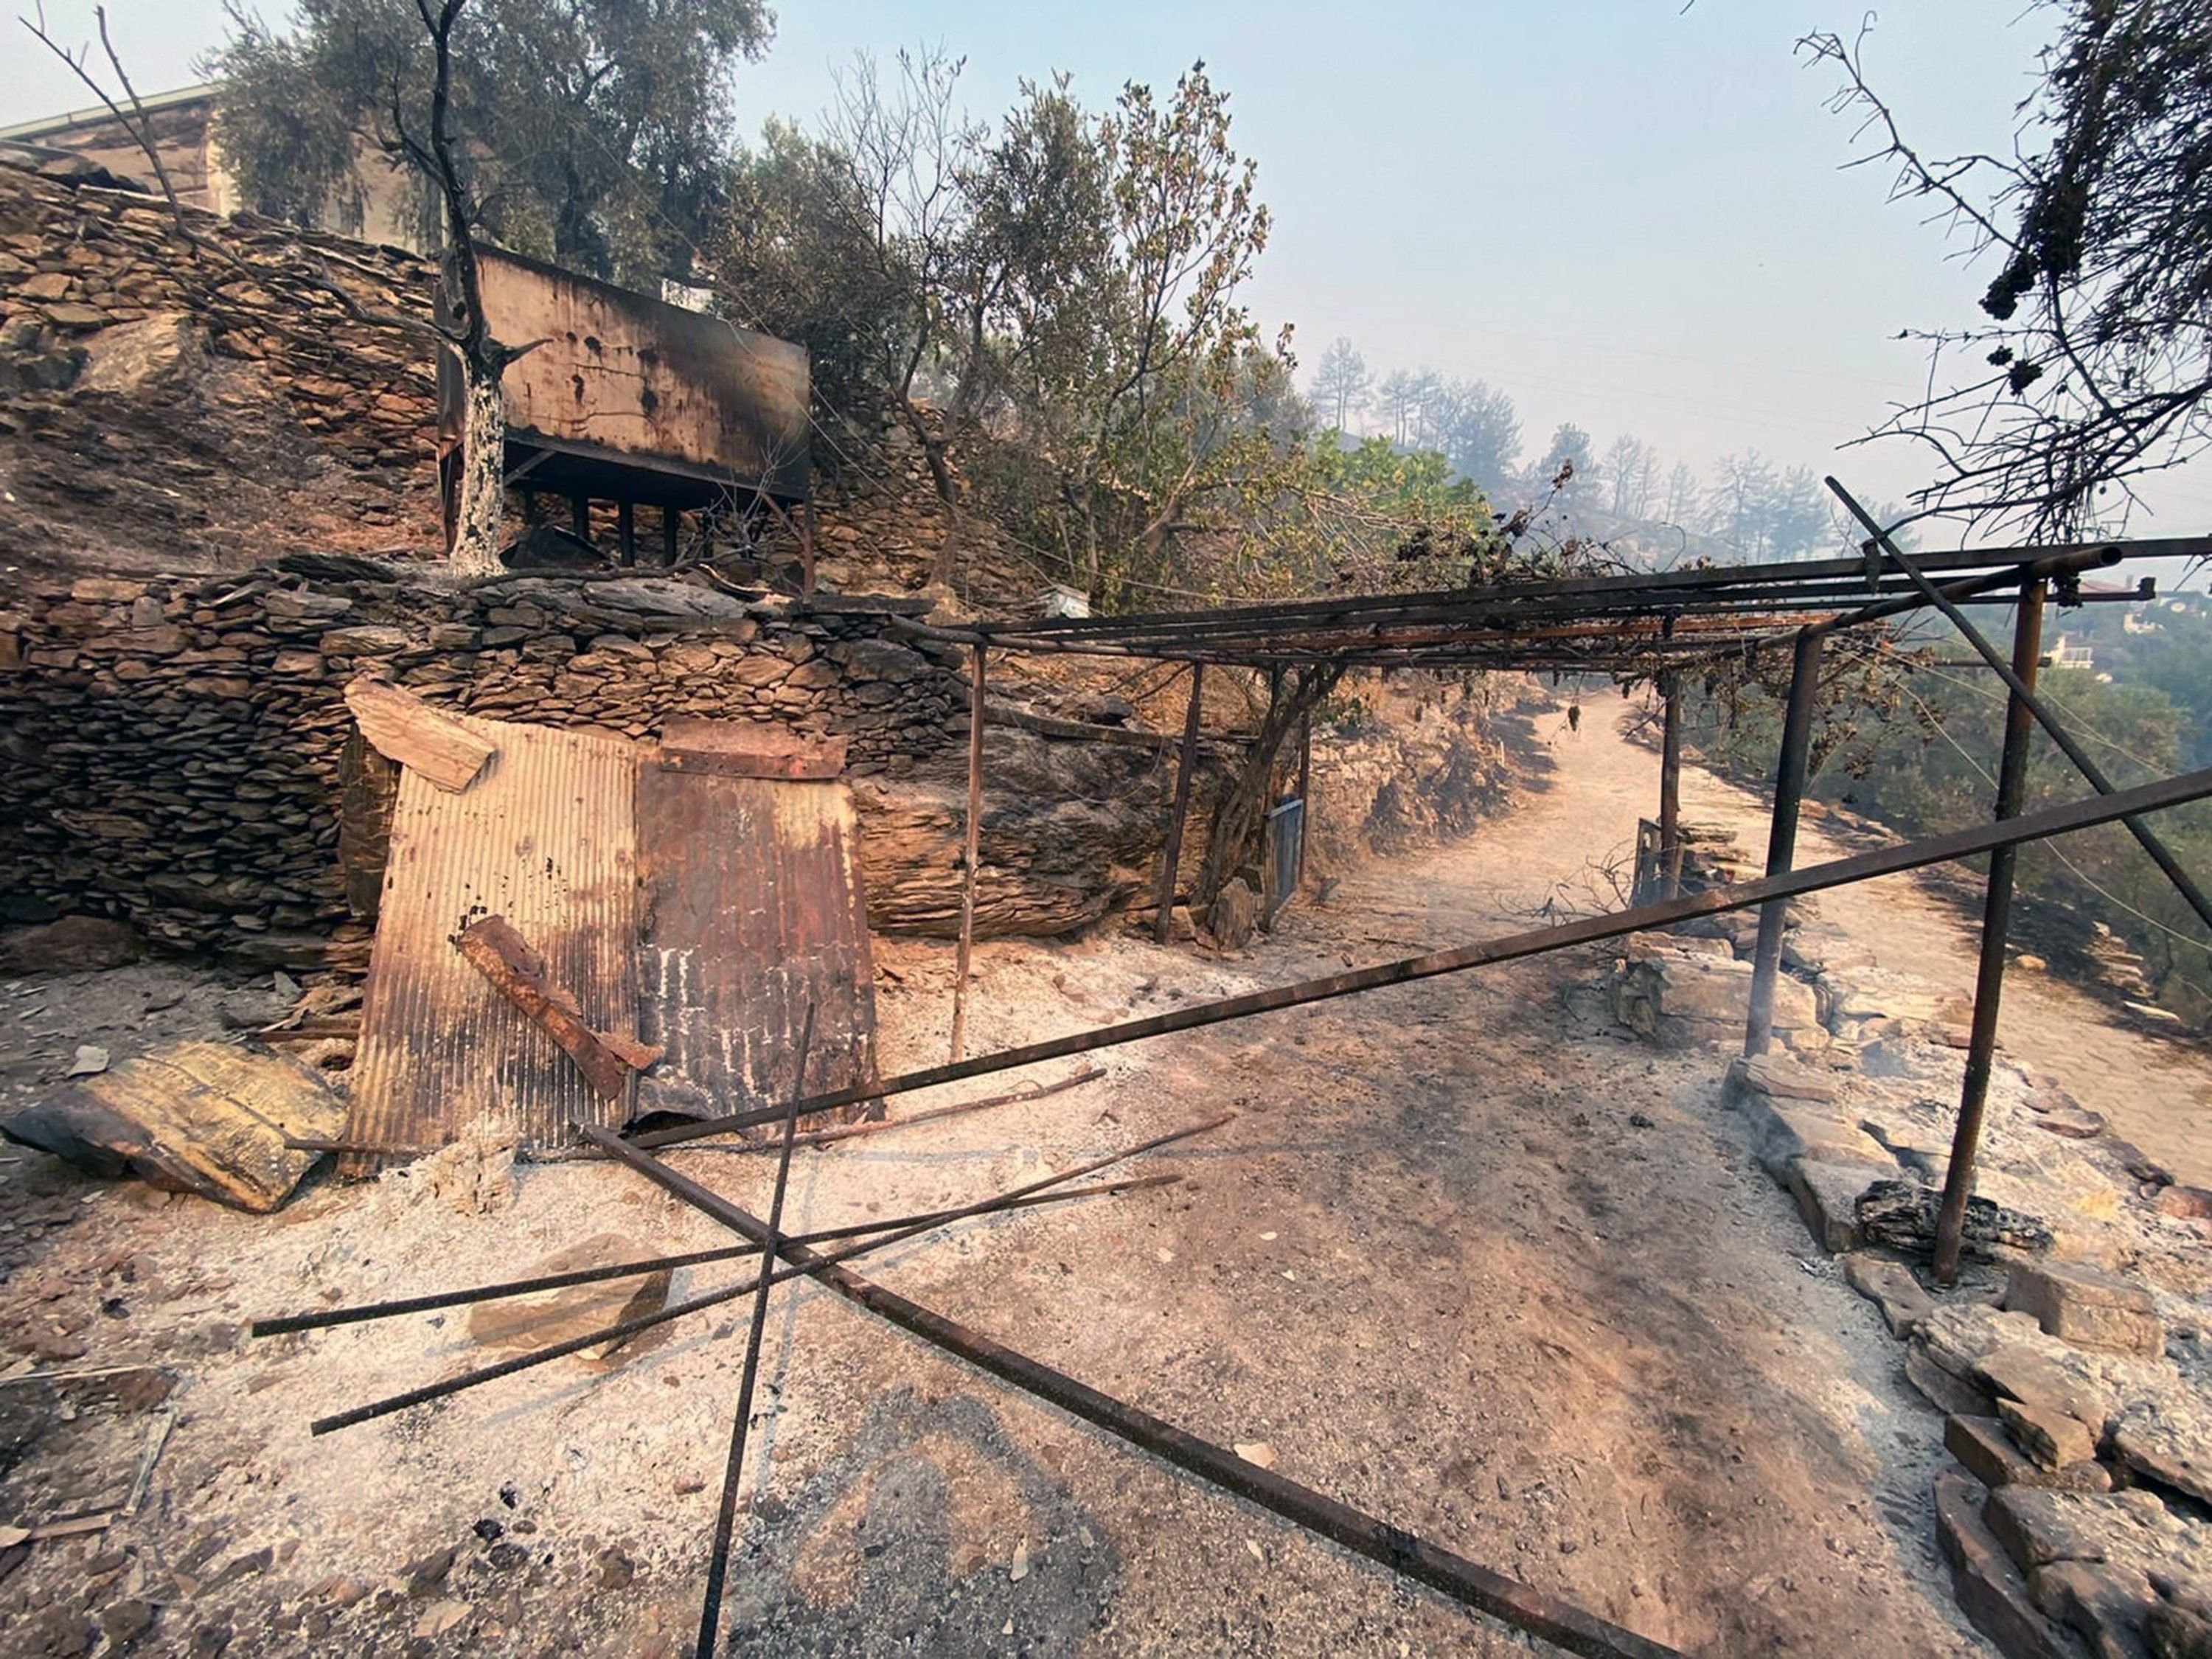 burned road and facilities after a wildfire raged in Milas, Mugla province, Turkey.